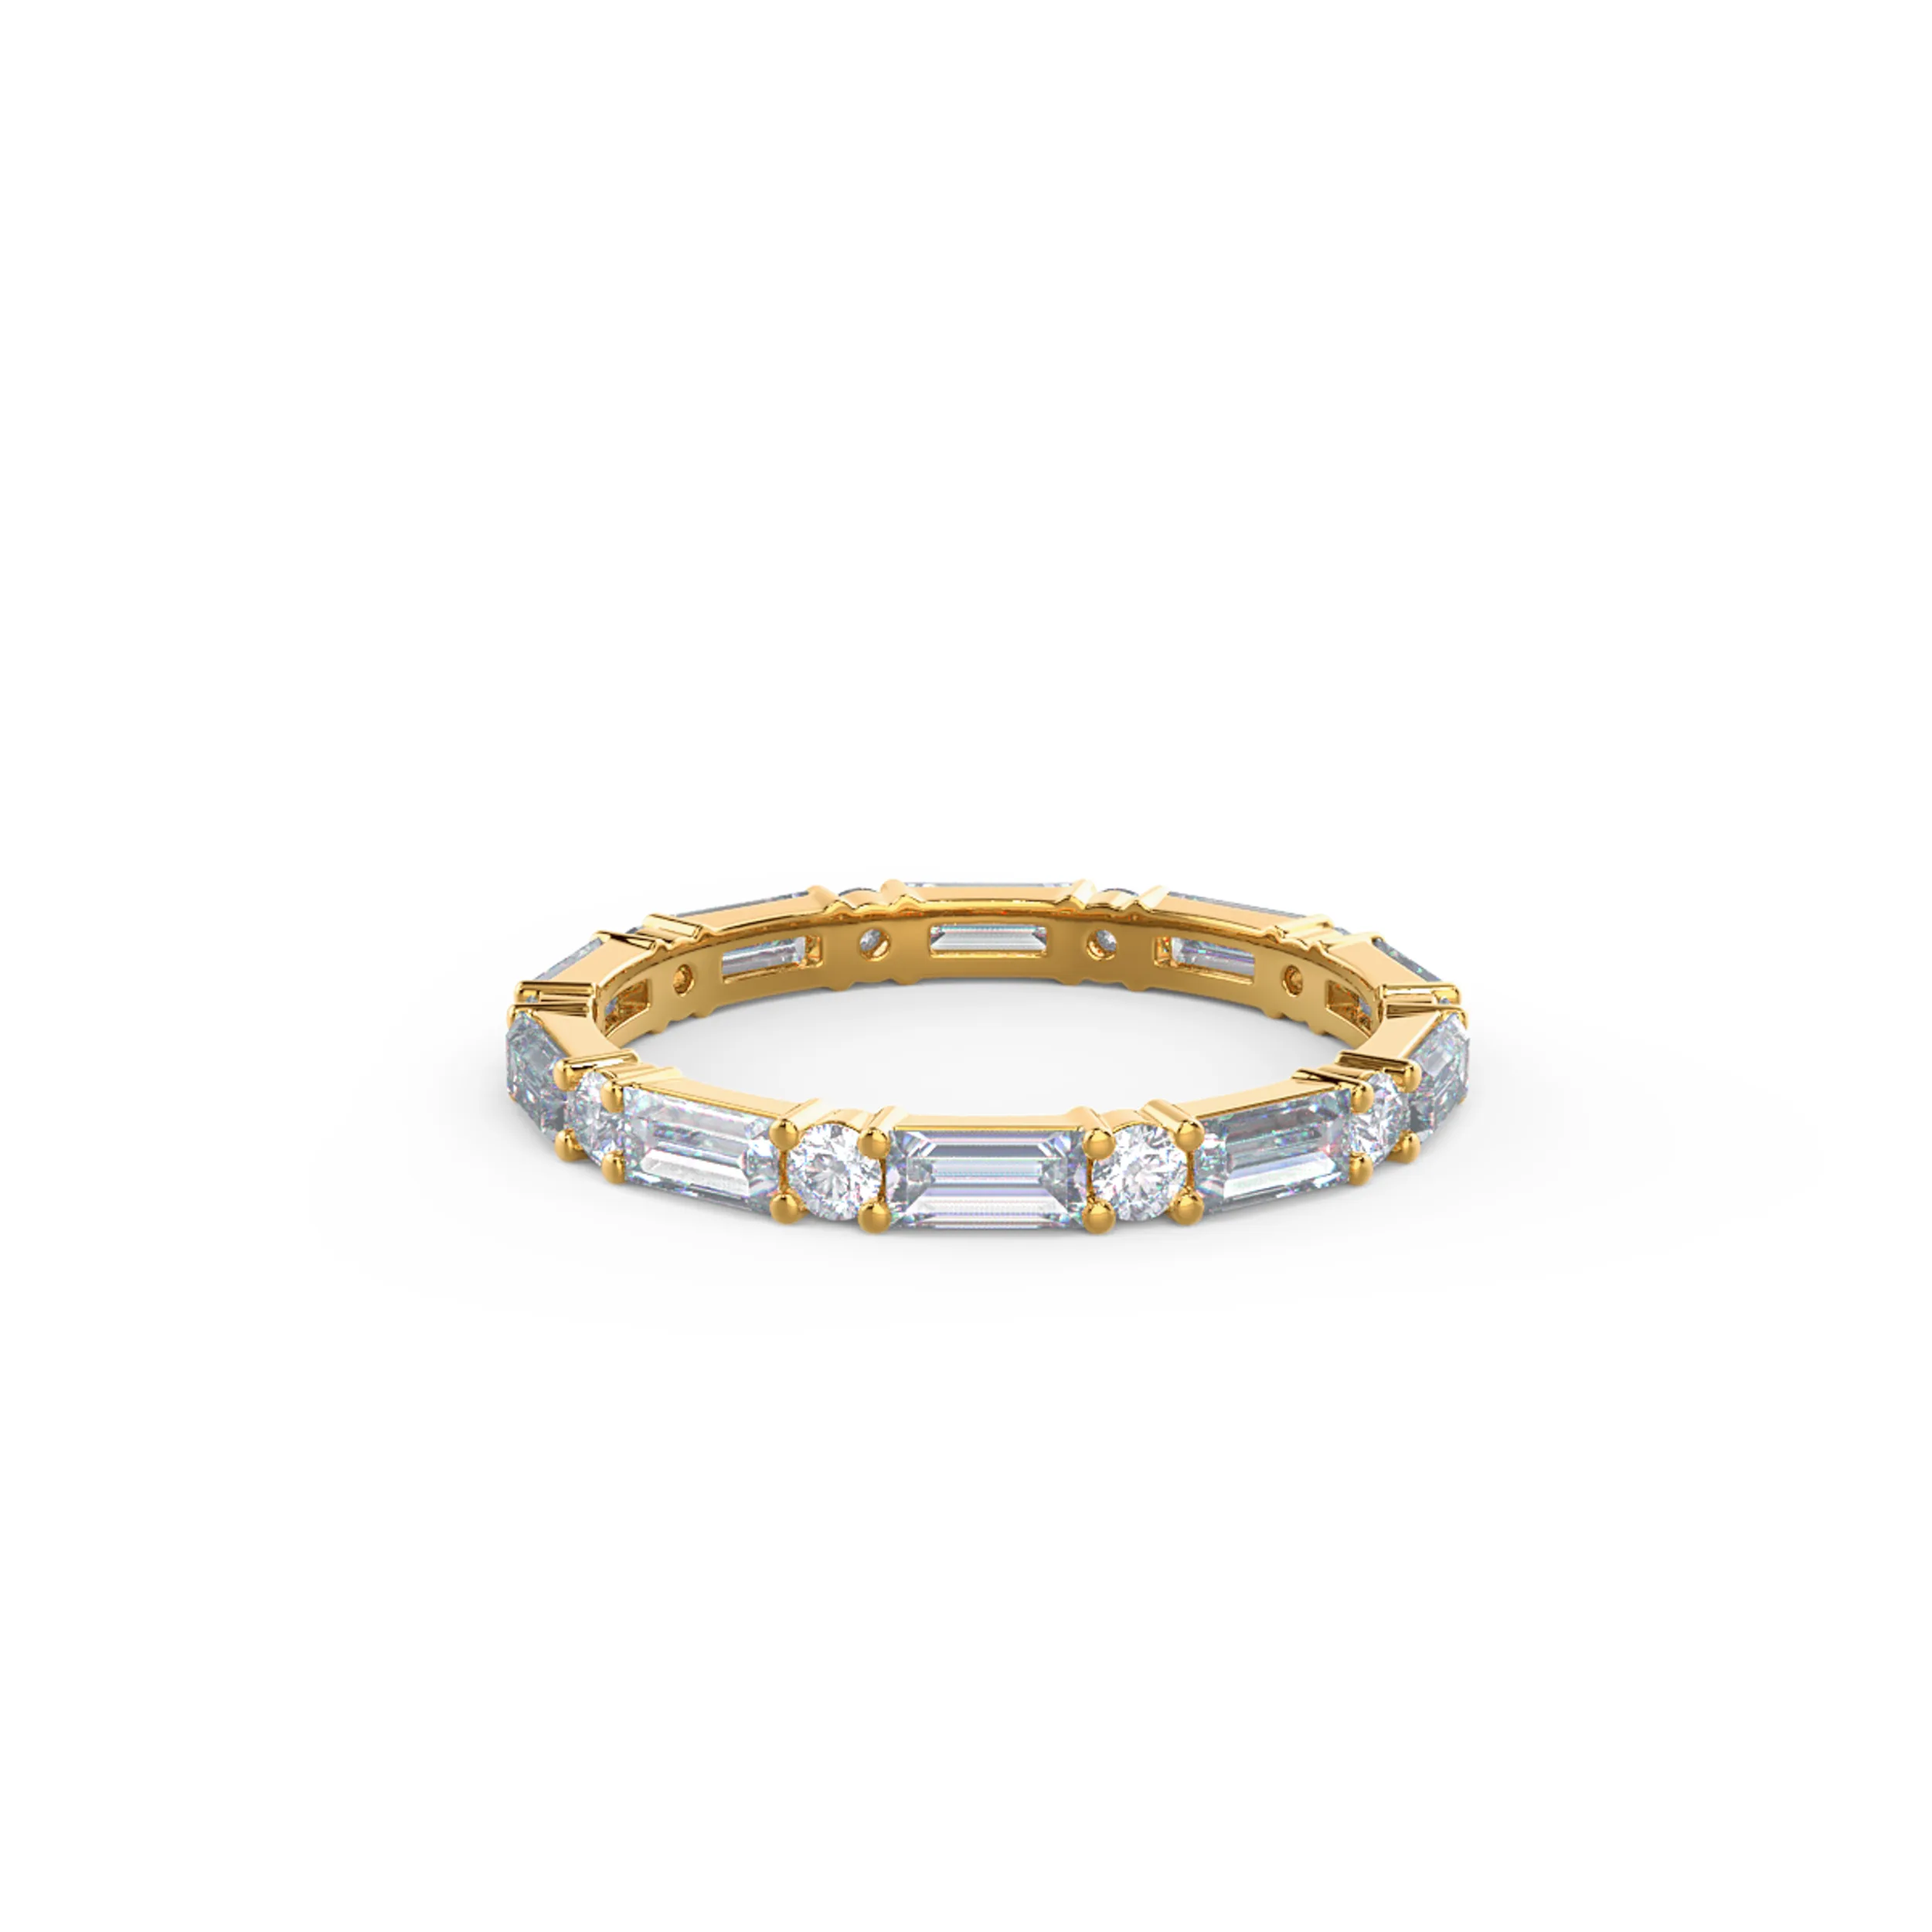 Hand Selected 1.3 ct Diamonds set in 18k Yellow Gold Baguette and Round Eternity Band (Main View)